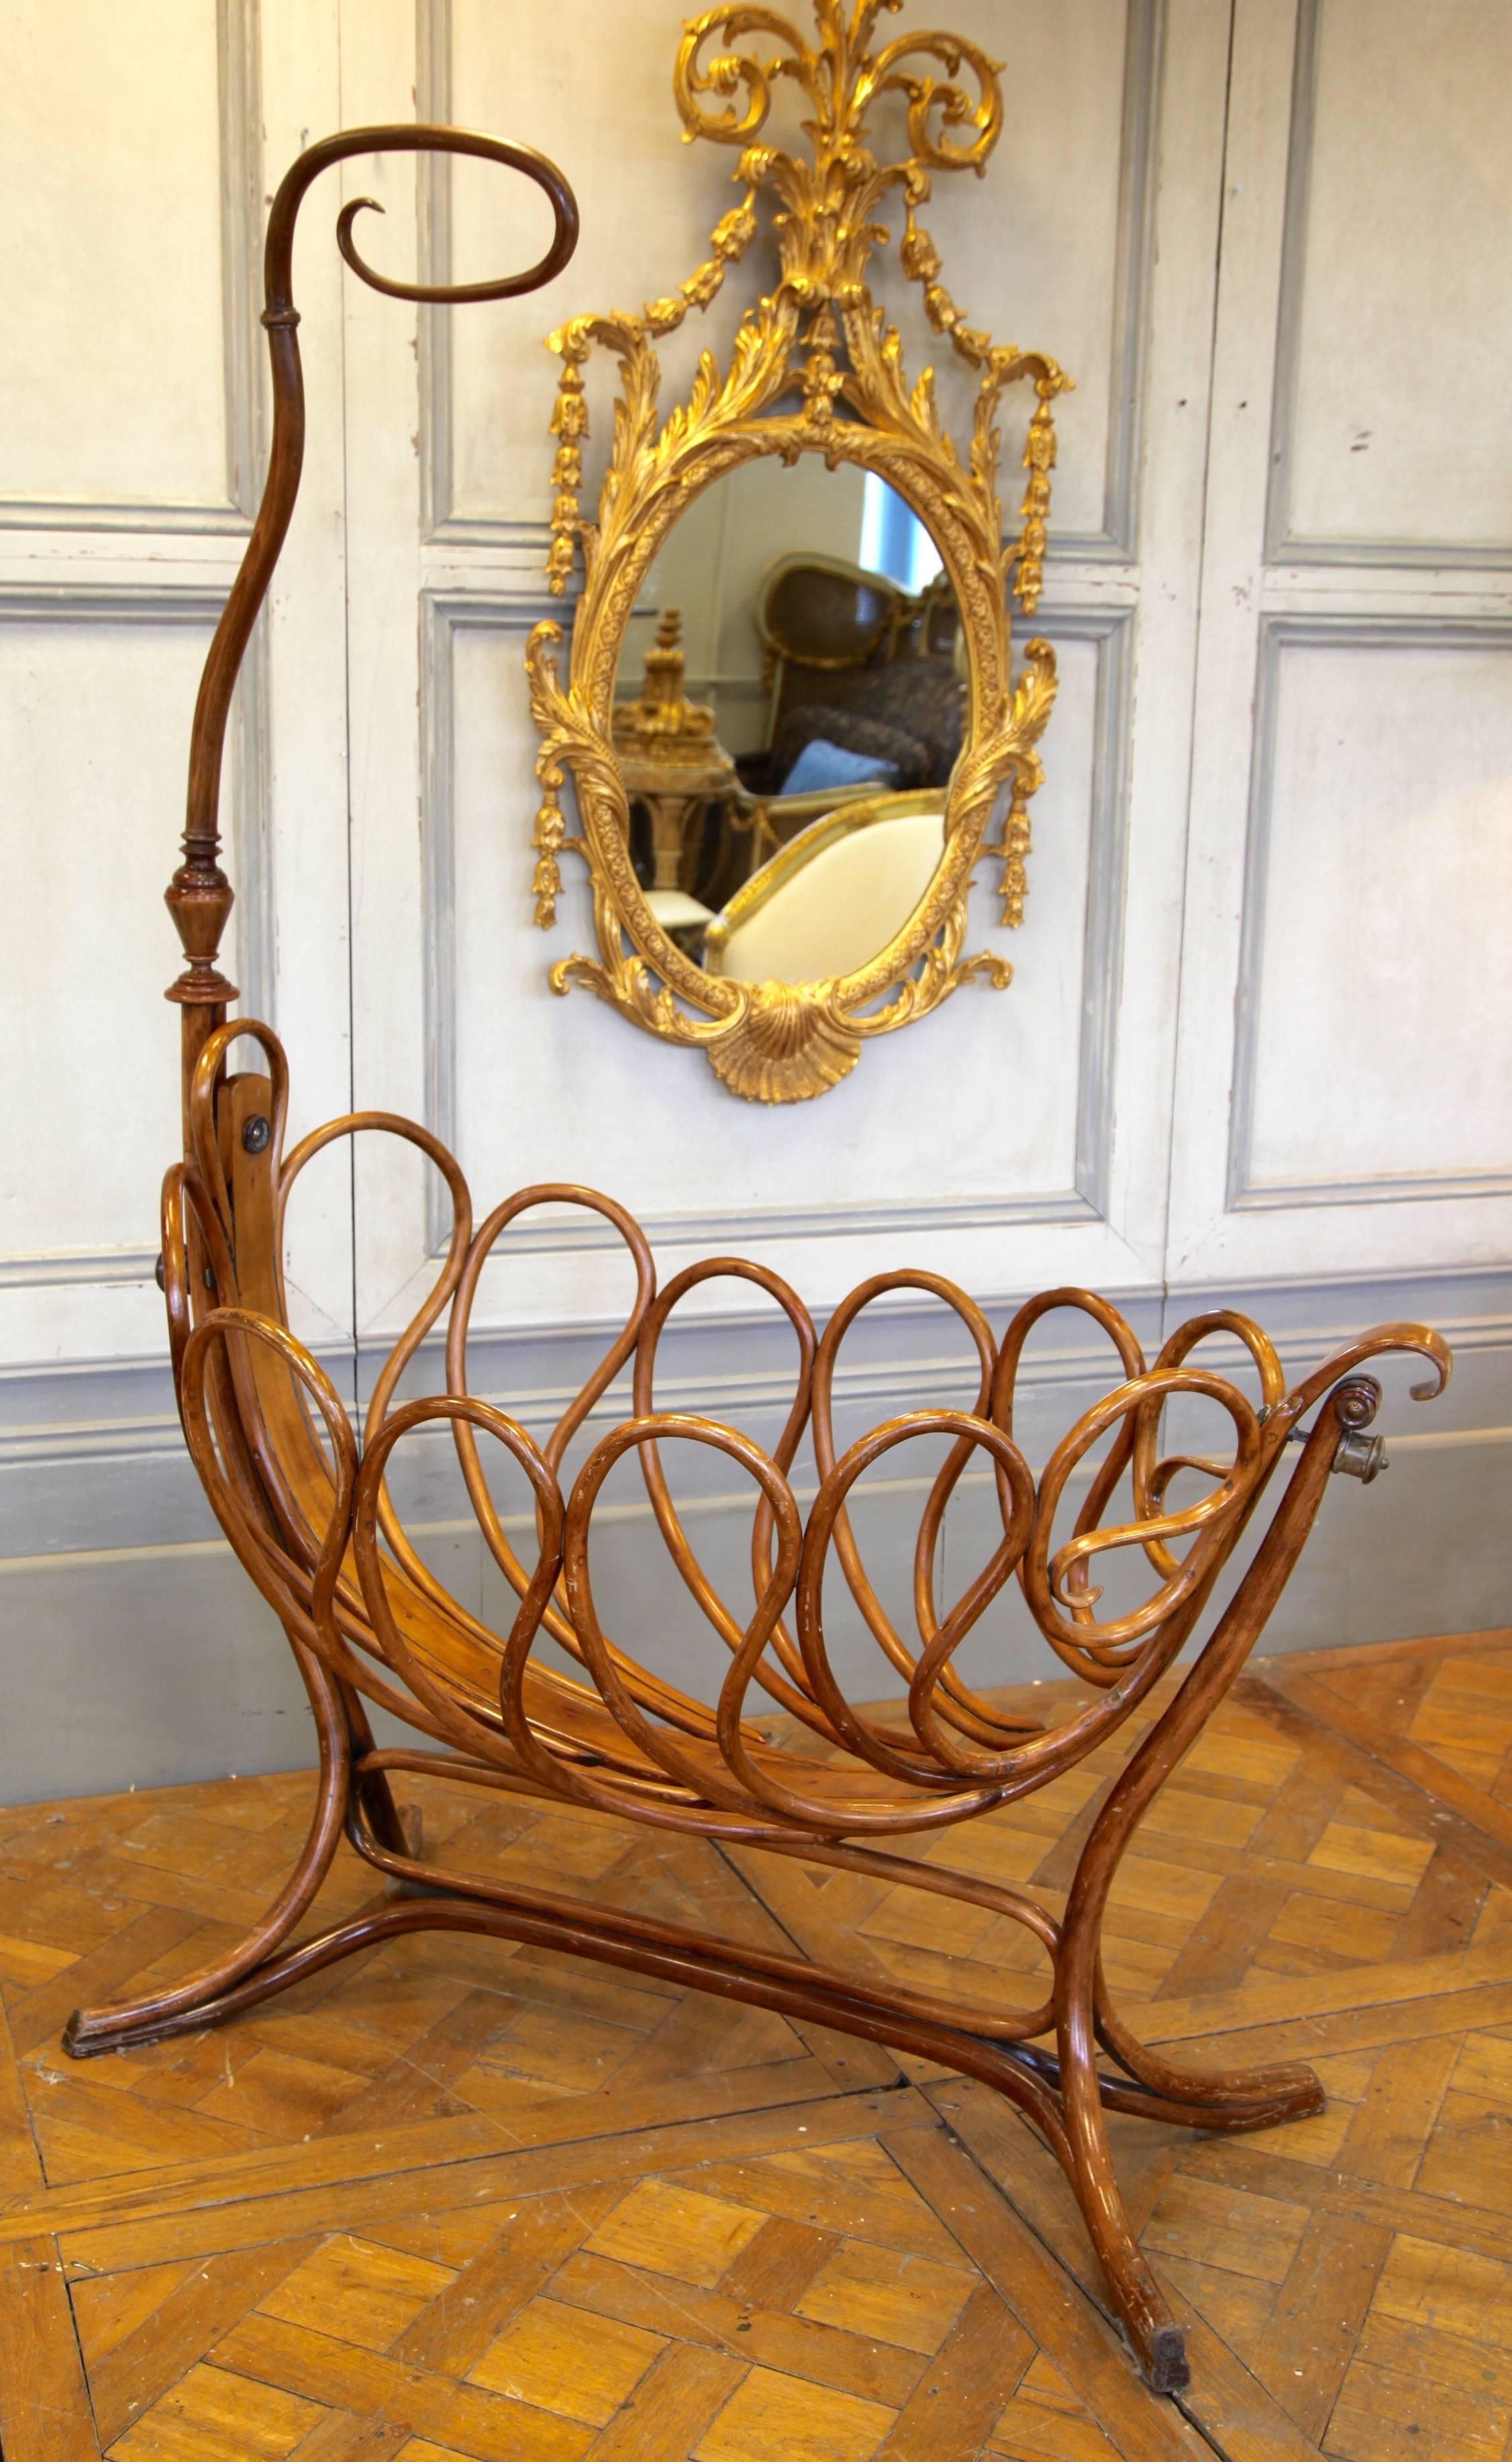 This French bentwood cradle made in the Thonet style is a rare find, circa late 1900s. The cradle is in perfect working order with a gentle rocking action which can be blocked by a round handle (seen at the back) when required. A mattress can be